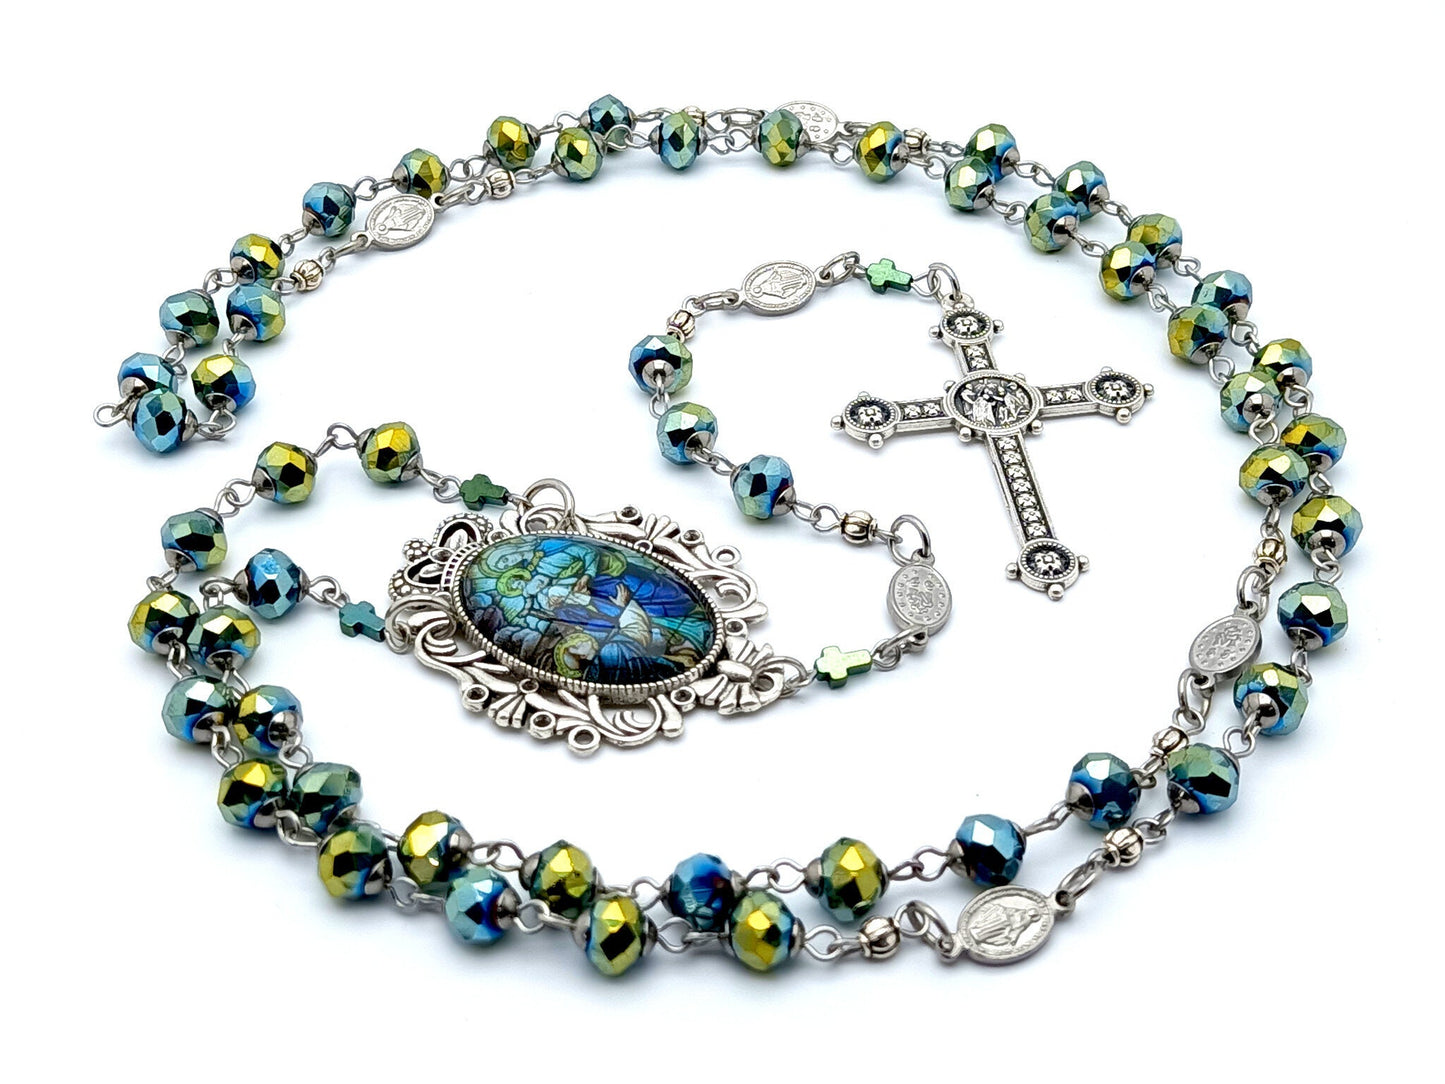 Our Lady of Mount Carmel unique rosary beads with blue green glass and stainless steel Miraculous Medal beads, silver Papal crucifix and picture centre medal.